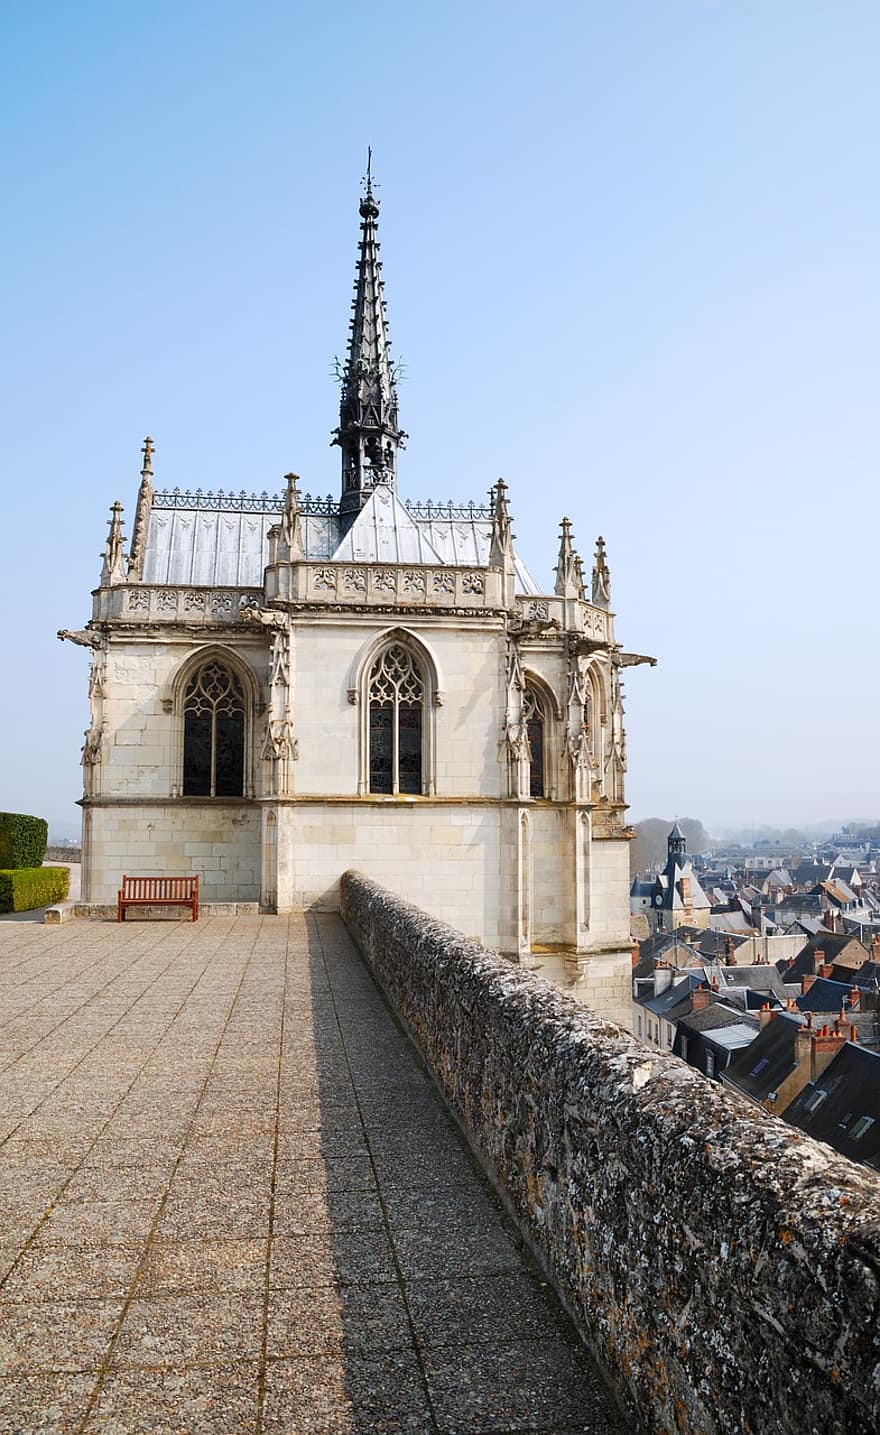 Chapel, Royal, Chateau, Amboise, Gothic, Landmark, Architecture, France, French, Medieval, Exterior